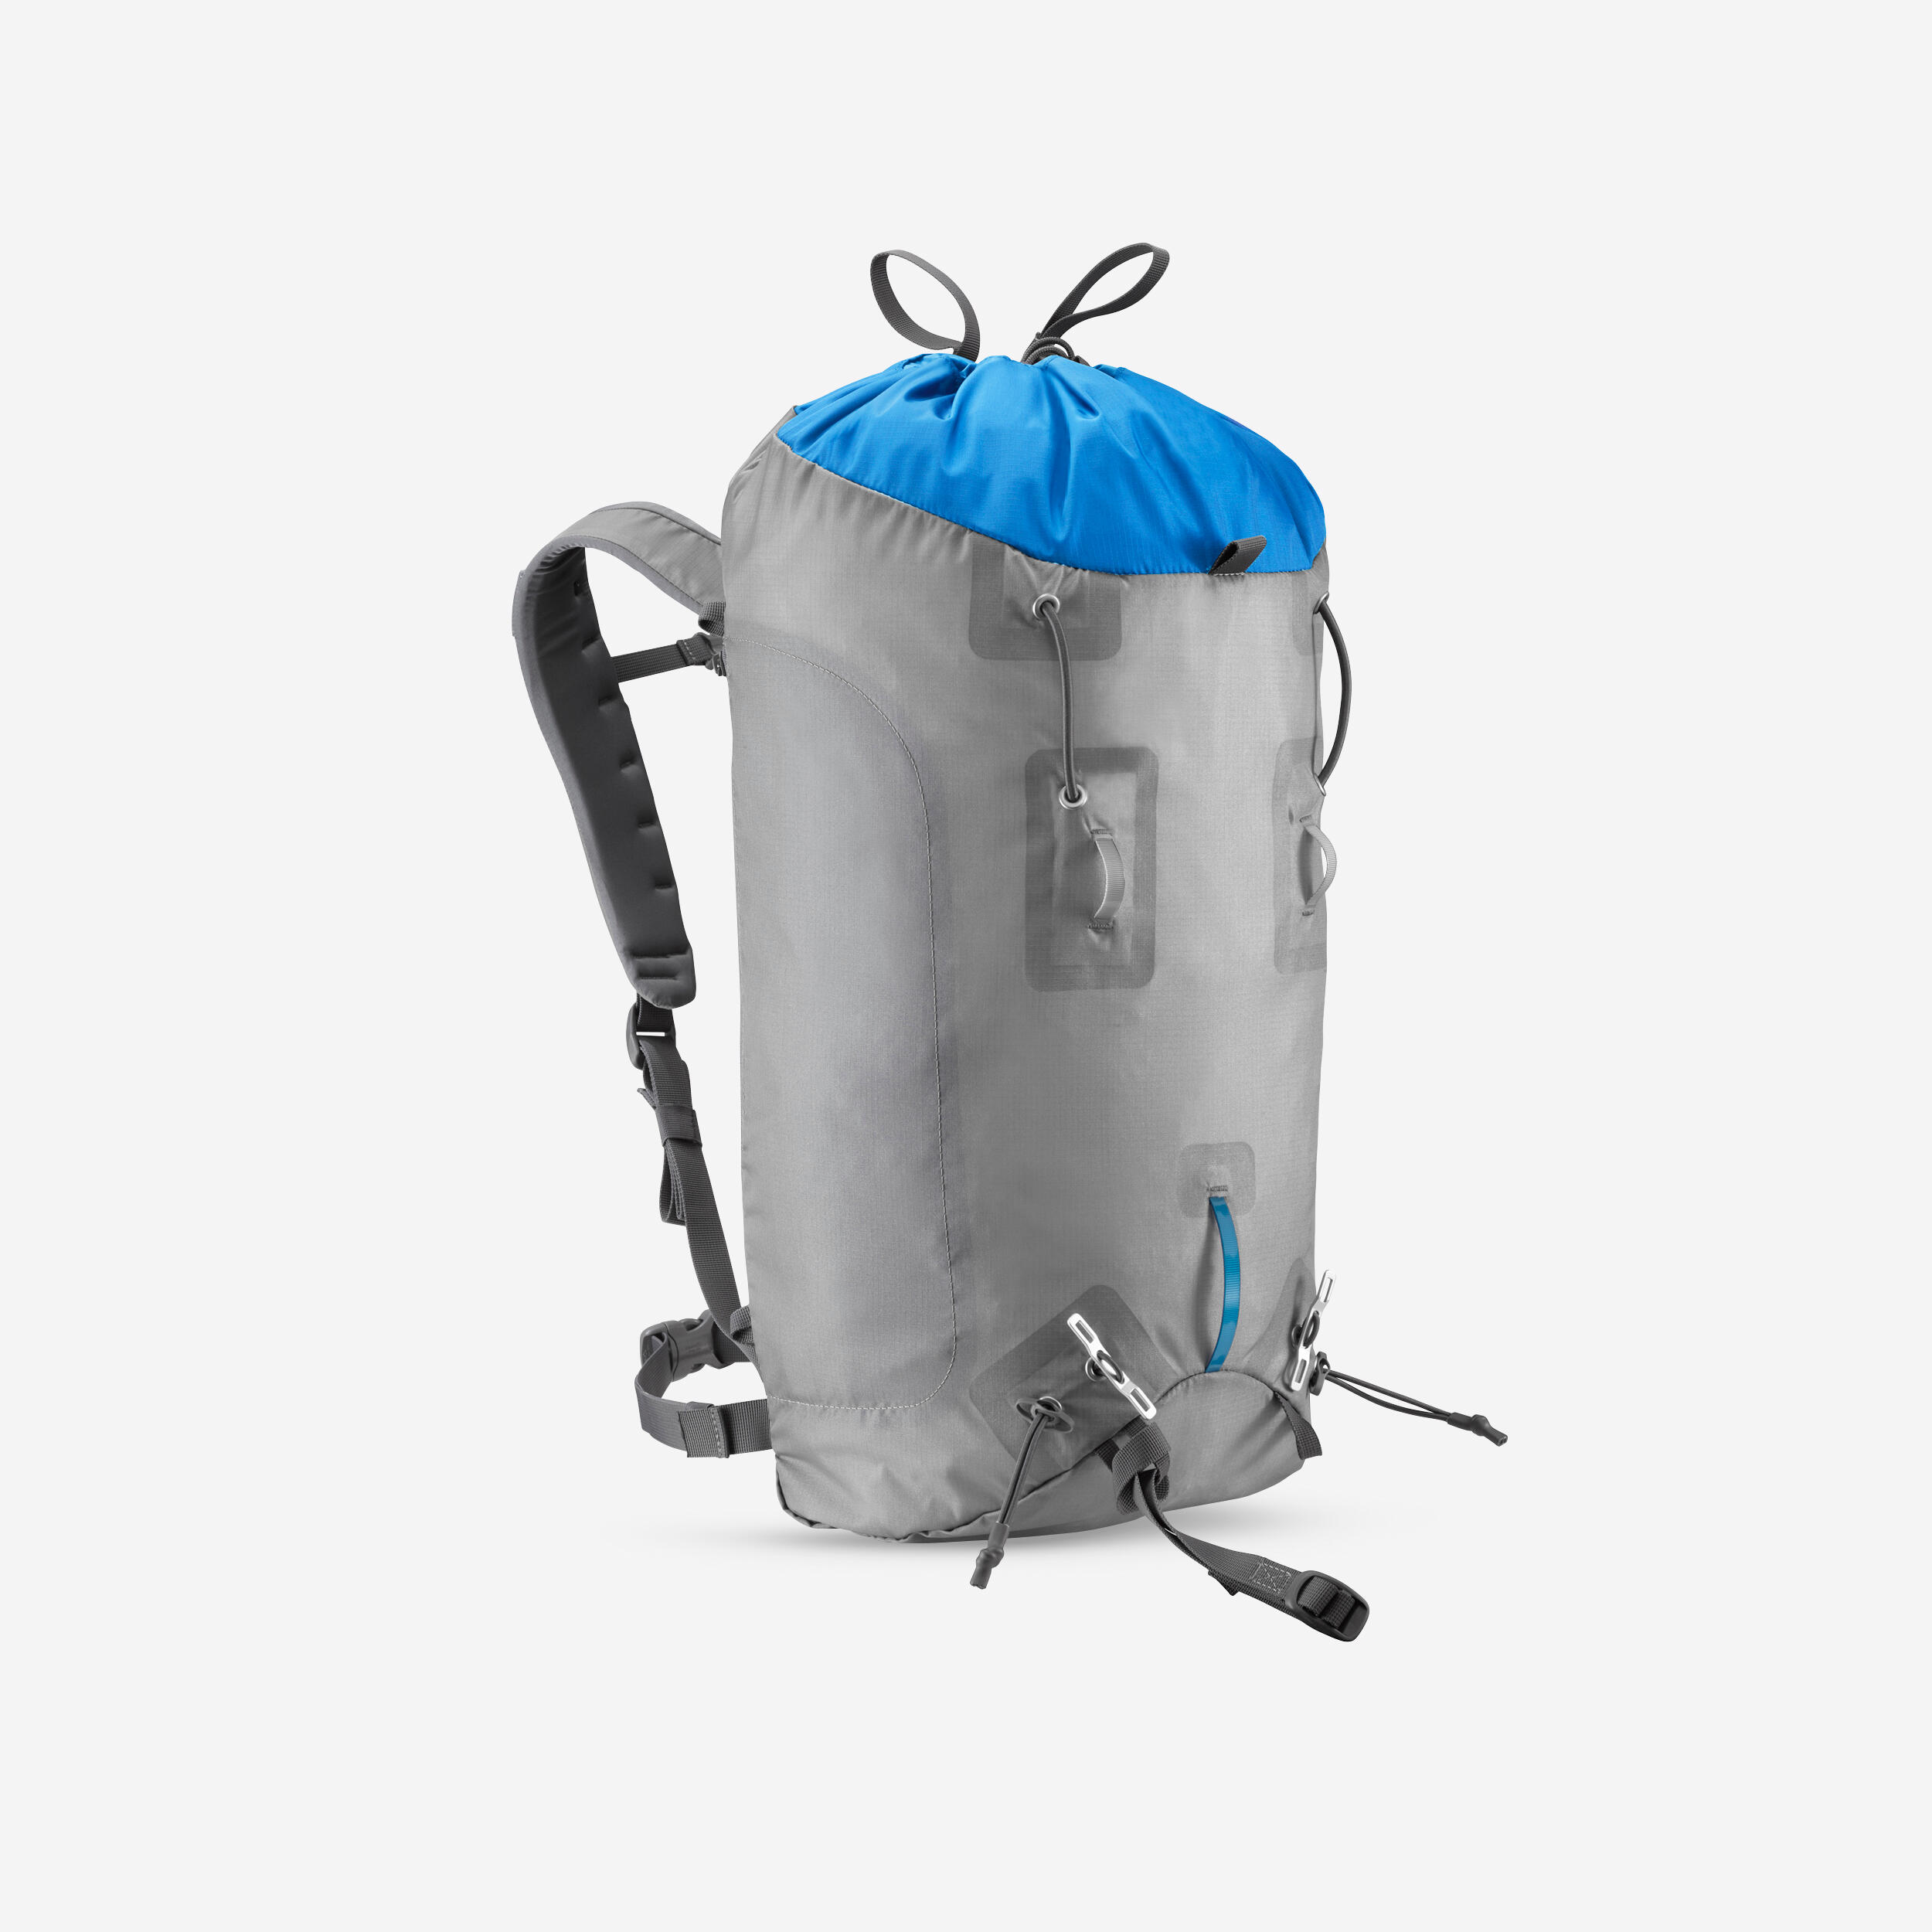 Mountaineering Backpack 33 Litres - SPRINT 33 BLUE 1/14